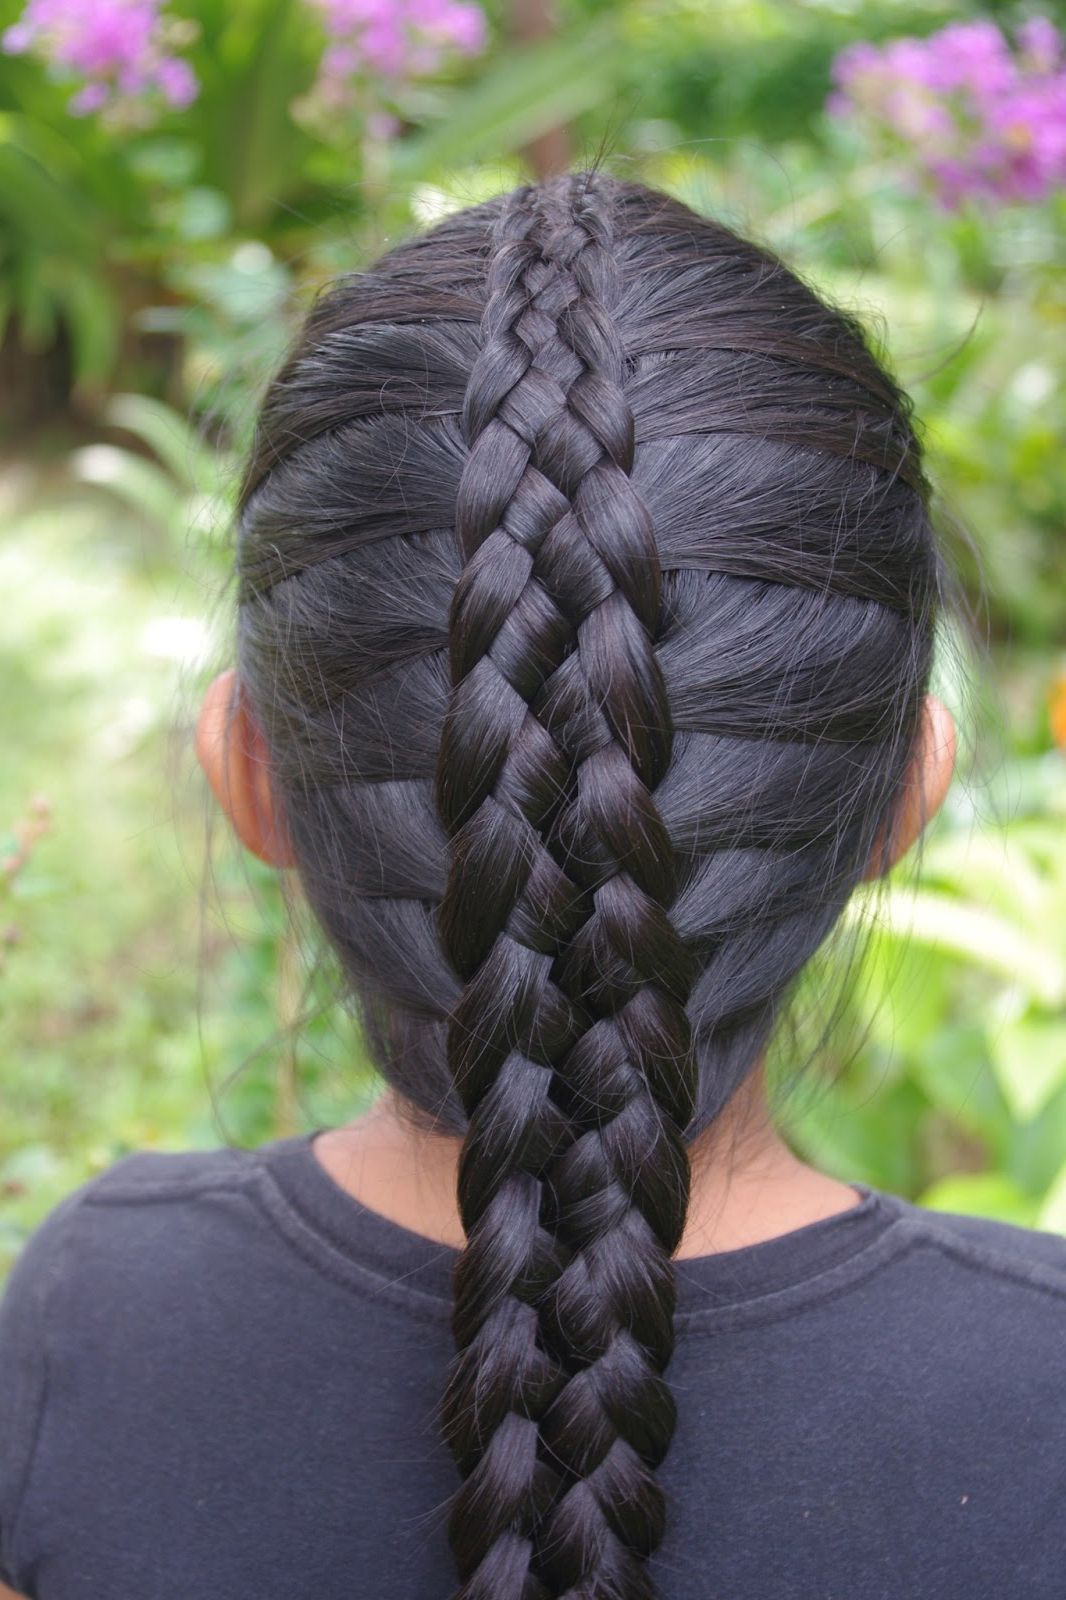 Braids & Hairstyles For Super Long Hair: Micronesian Girl Regarding Most Current Defined French Braid Hairstyles (View 5 of 20)